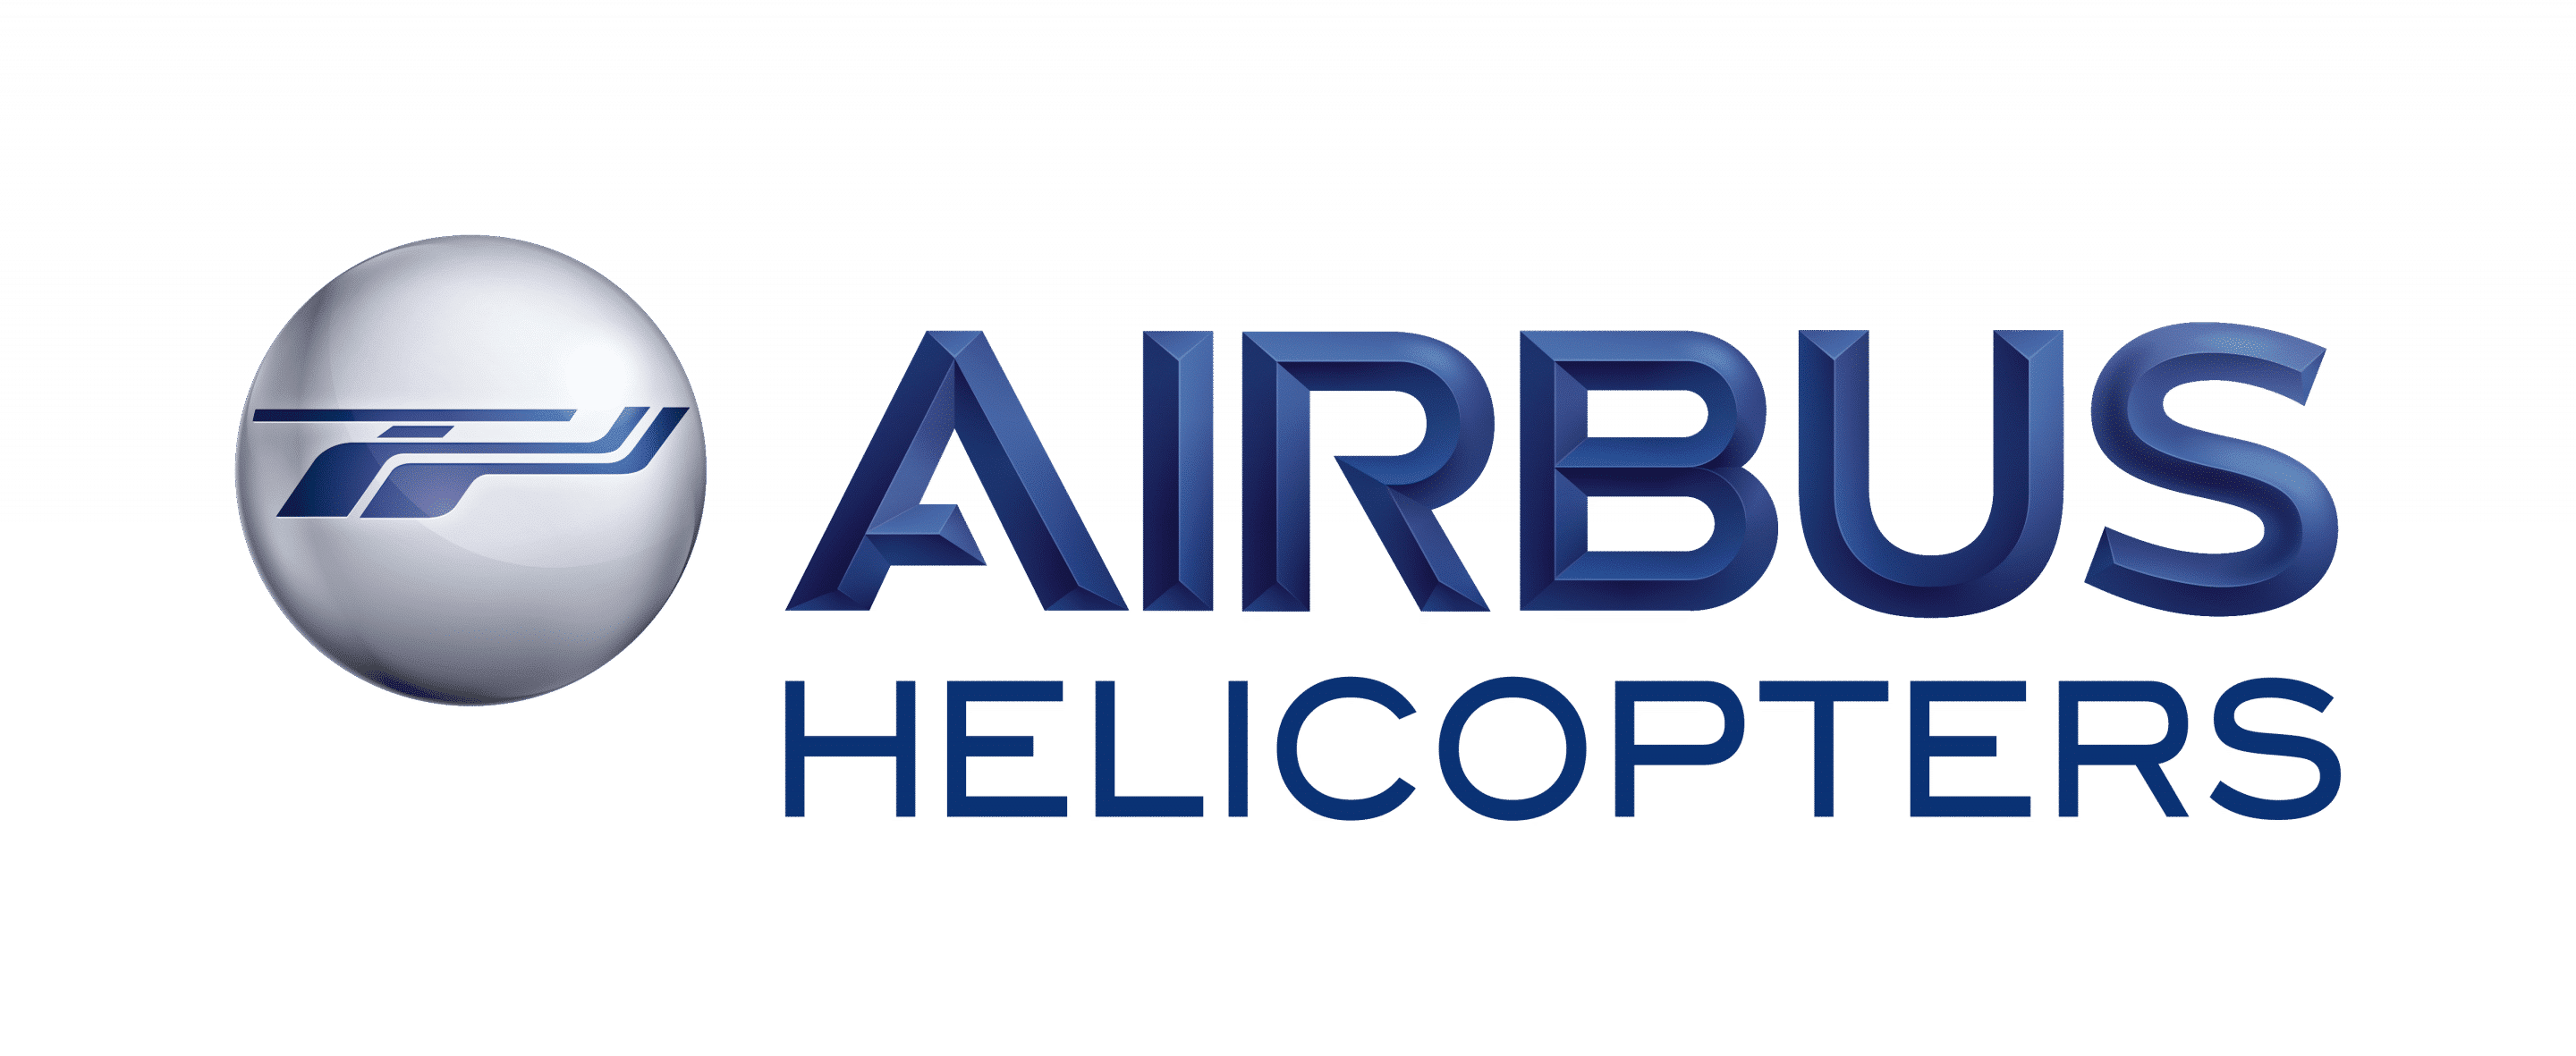 Le logo d'Airbus Helicopters